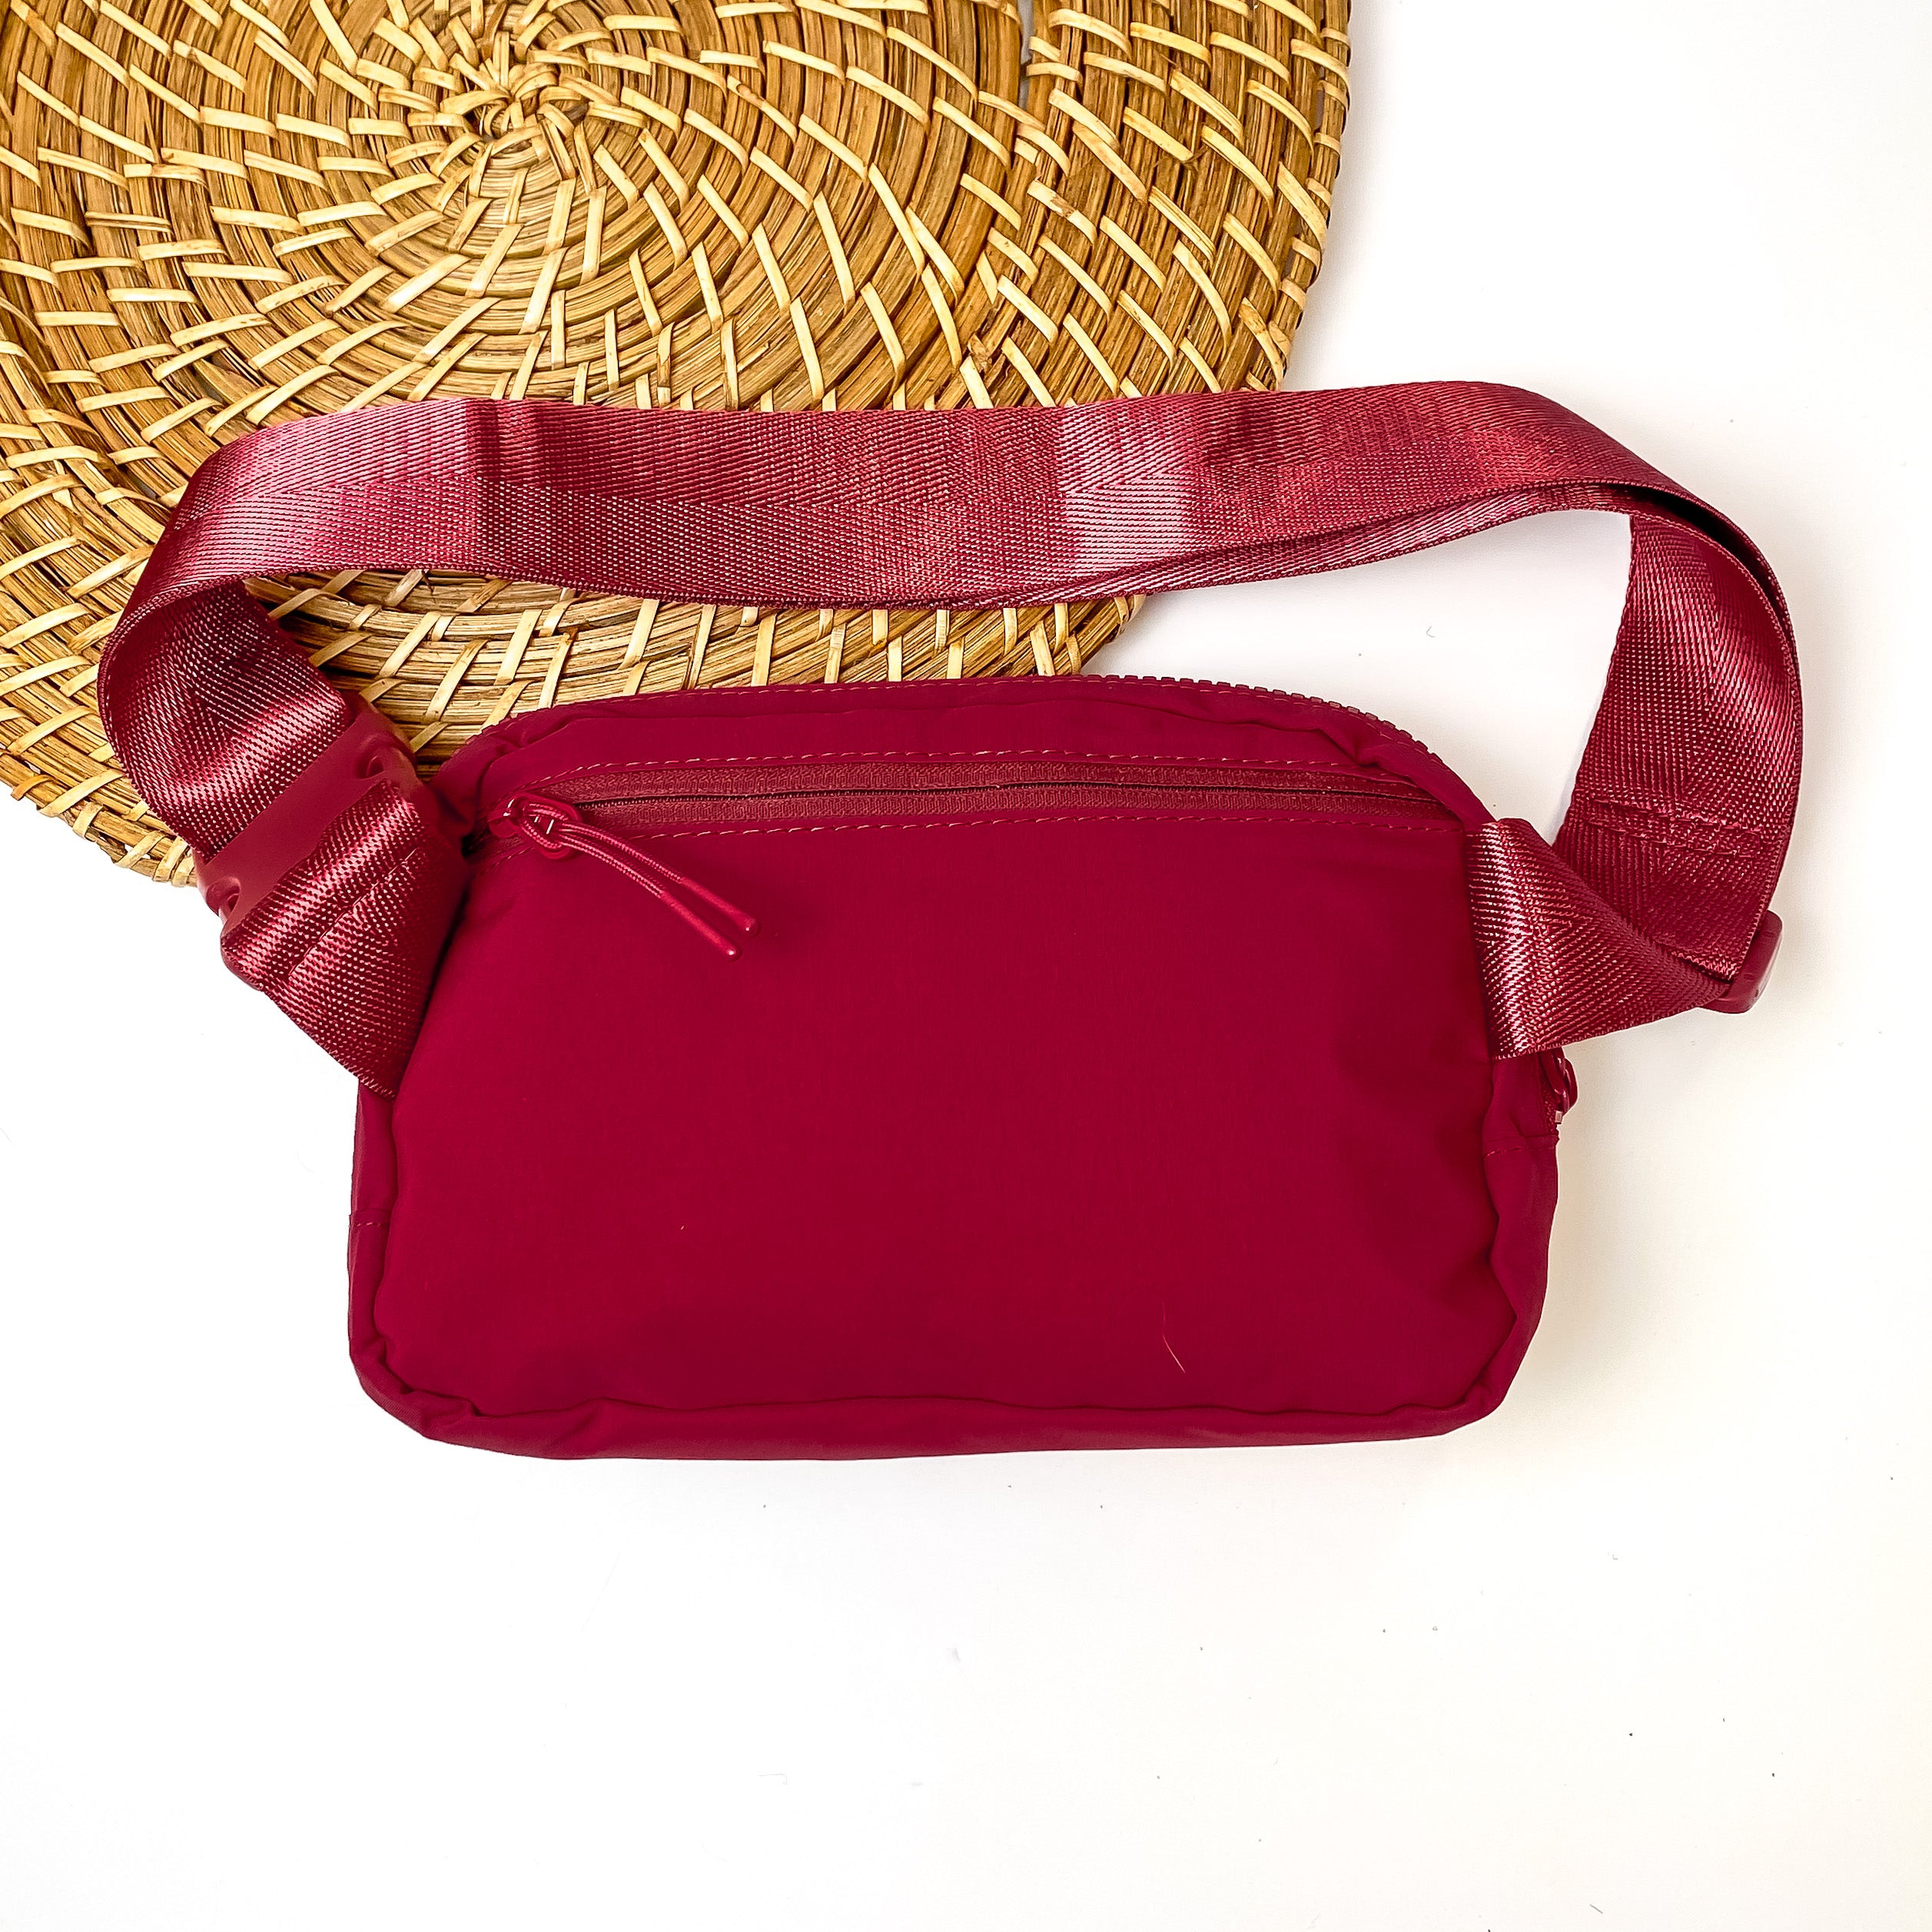 Love the Journey Fanny Pack in Maroon